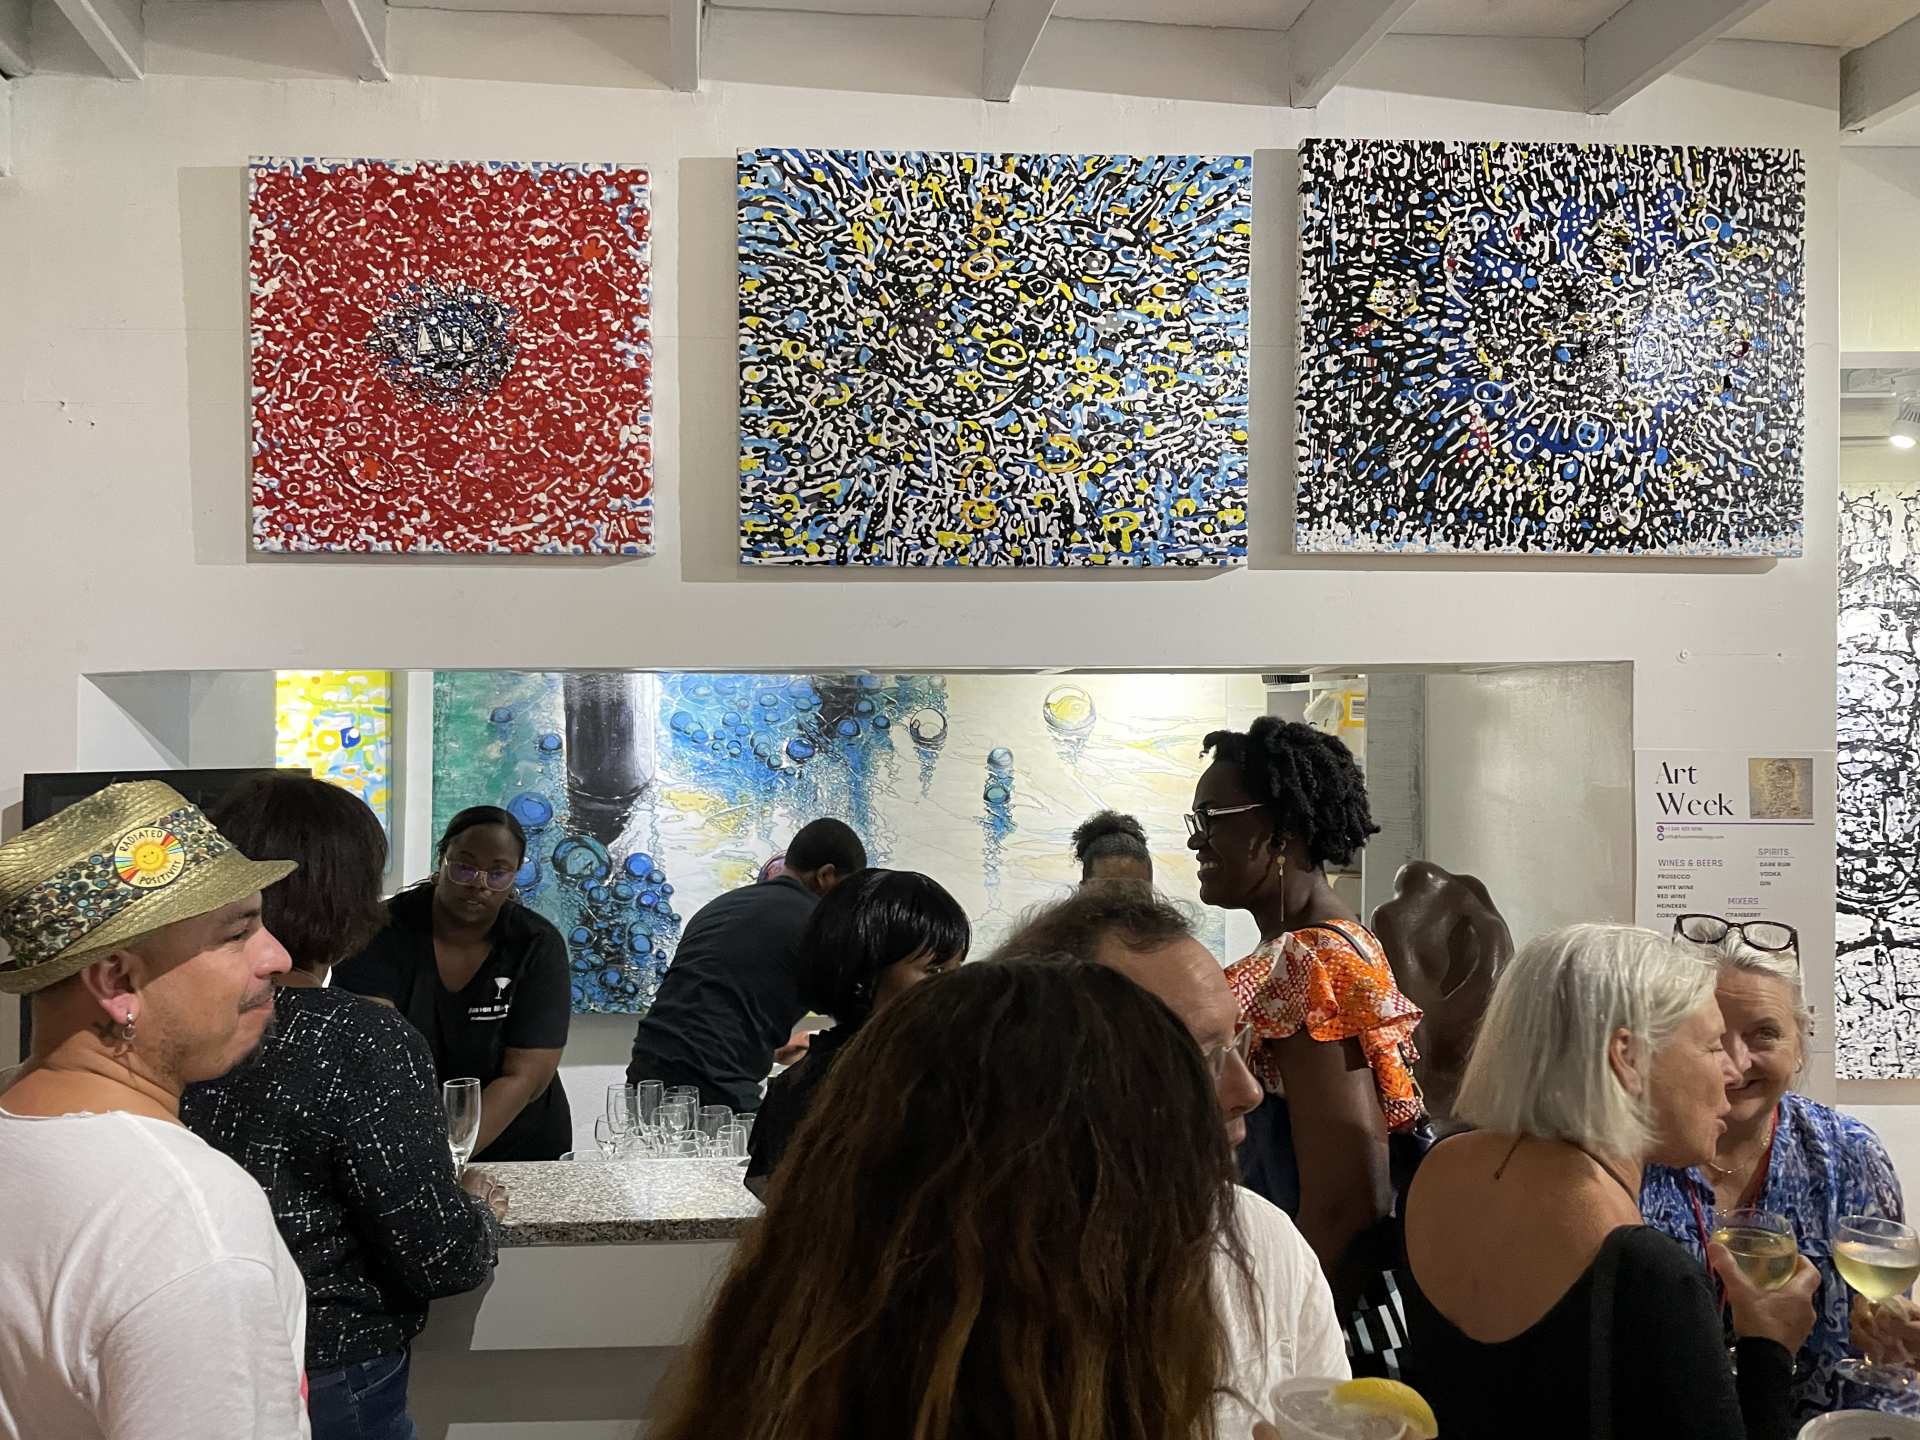 Artists and art pieces in a gallery in the Cayman Islands